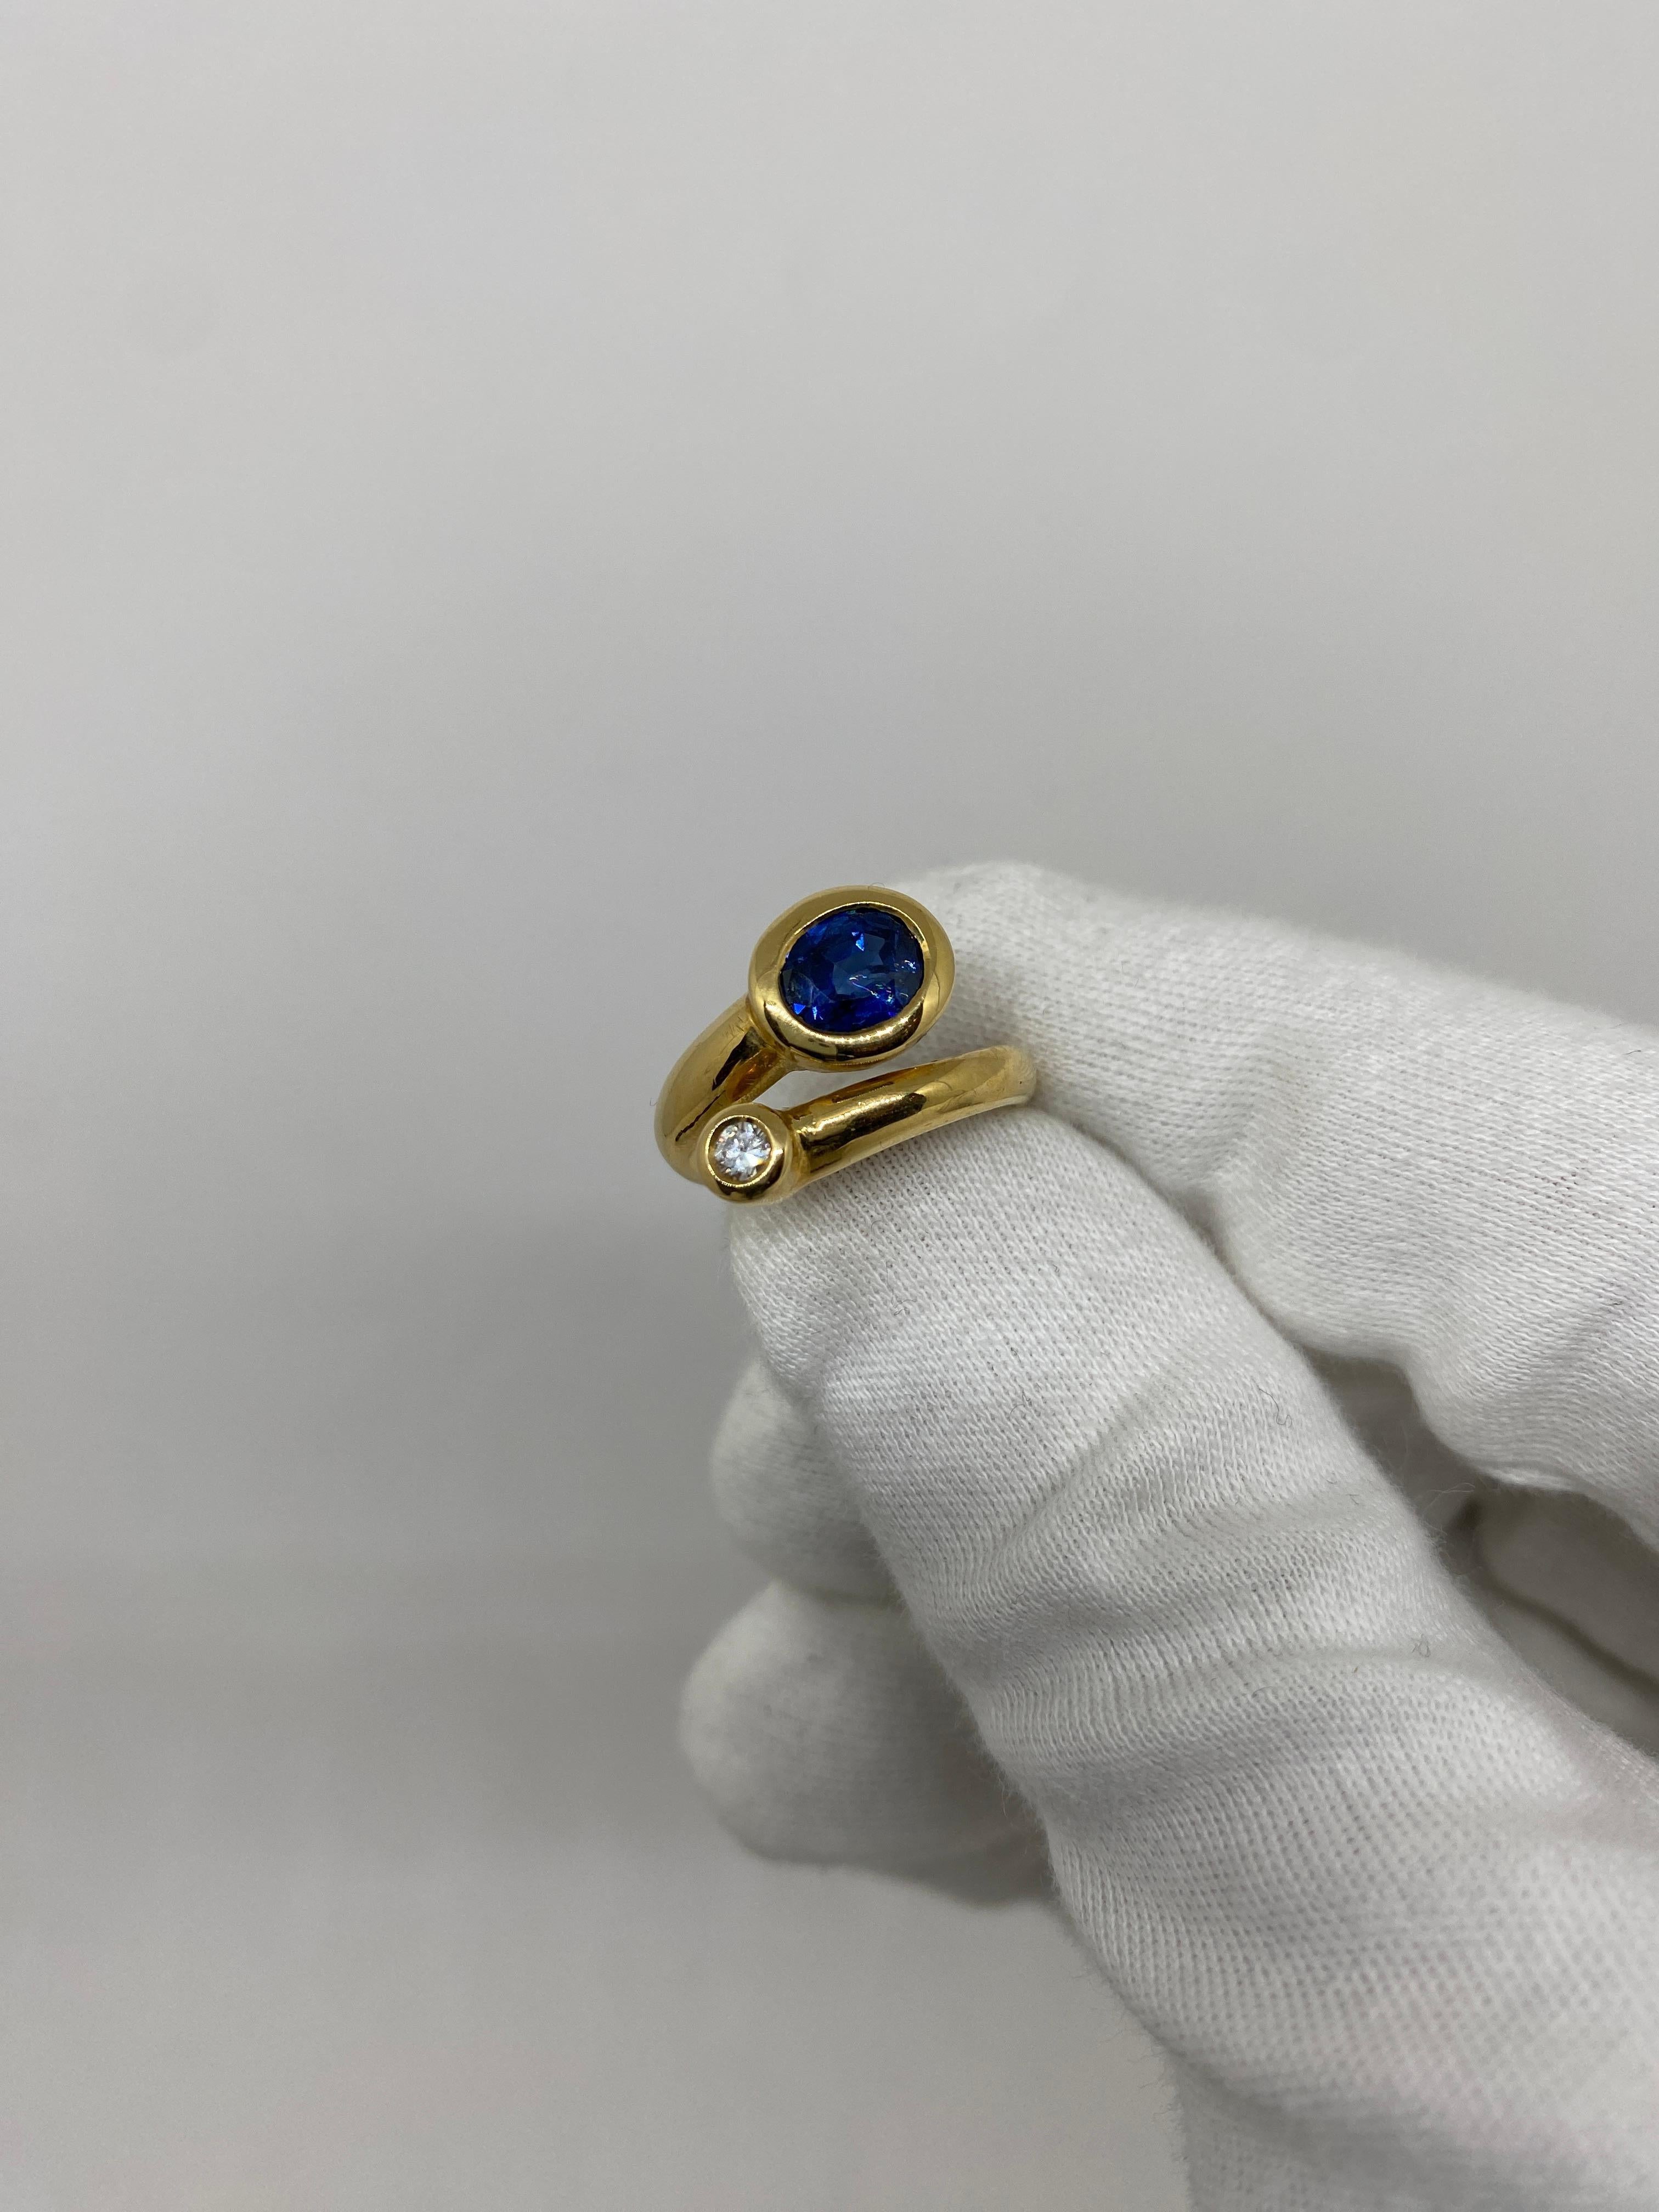 Ring made of 18kt yellow gold with oval-cut natural blue sapphire and brilliant-cut white diamond.

Welcome to our jewelry collection, where every piece tells a story of timeless elegance and unparalleled craftsmanship. As a family-run business in